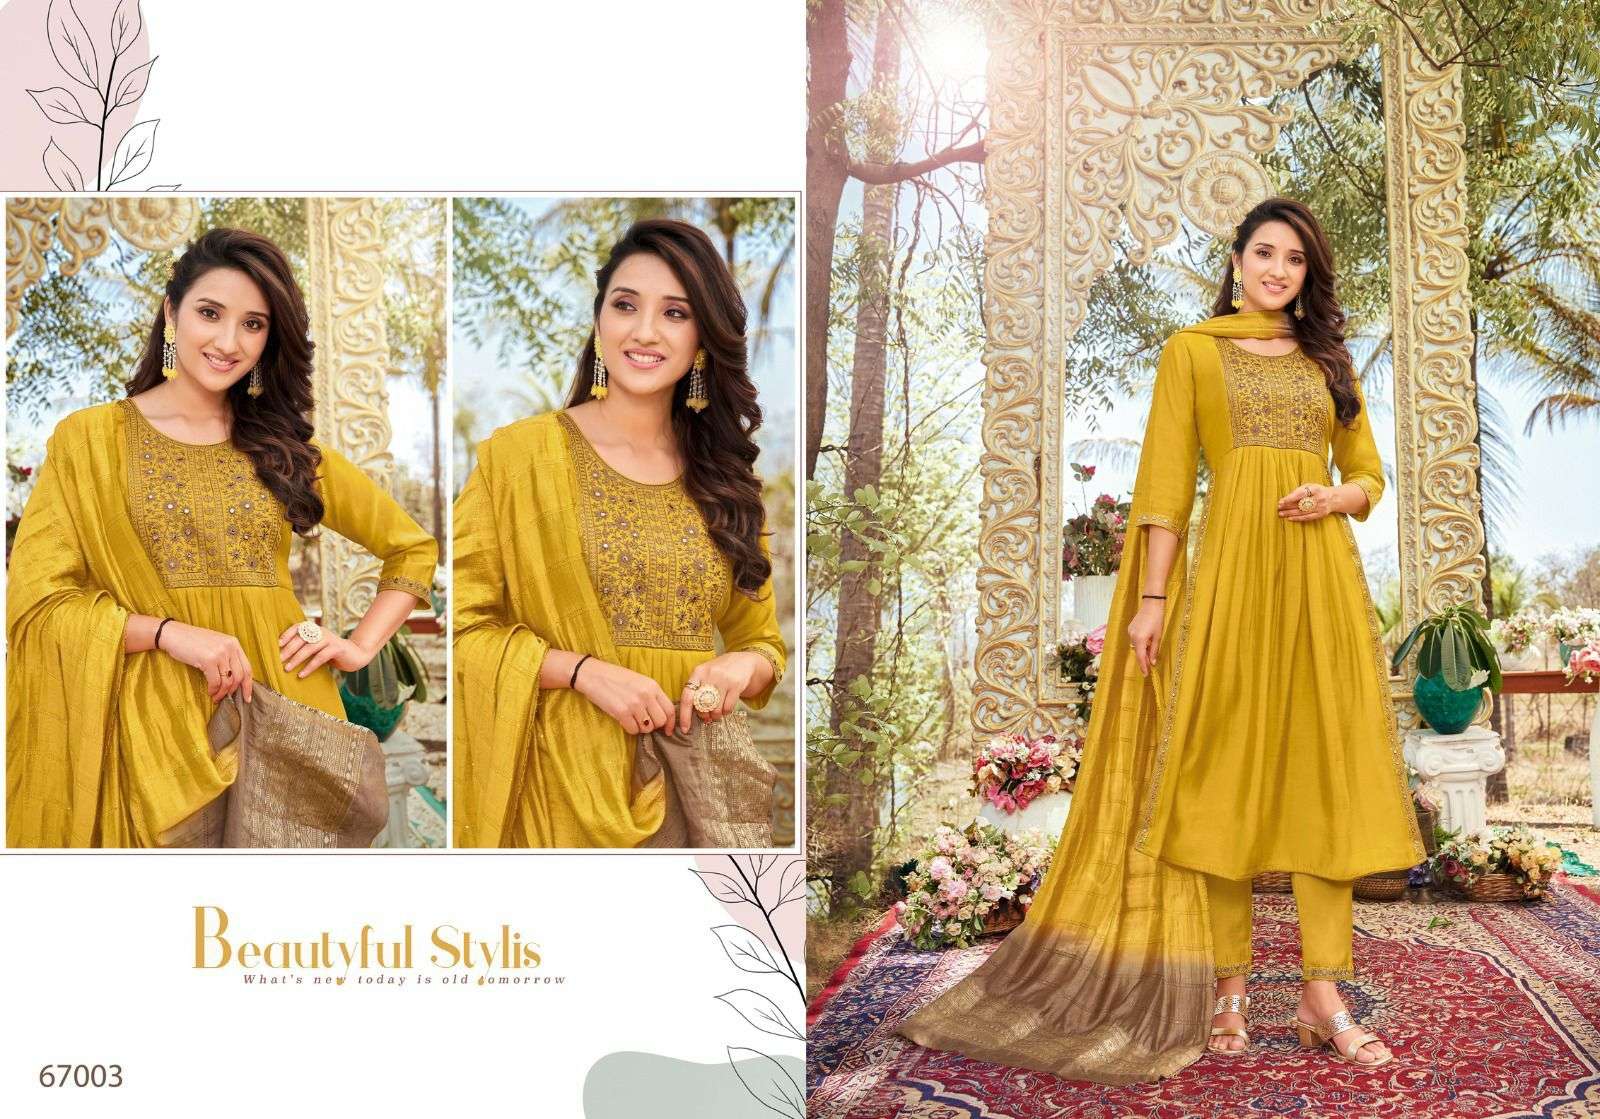 SPRING  ROLL NAYRA CUT VISCOS SILK WITH FANCY NACK WORK & SIDE LACE WORK Wholesale catalog